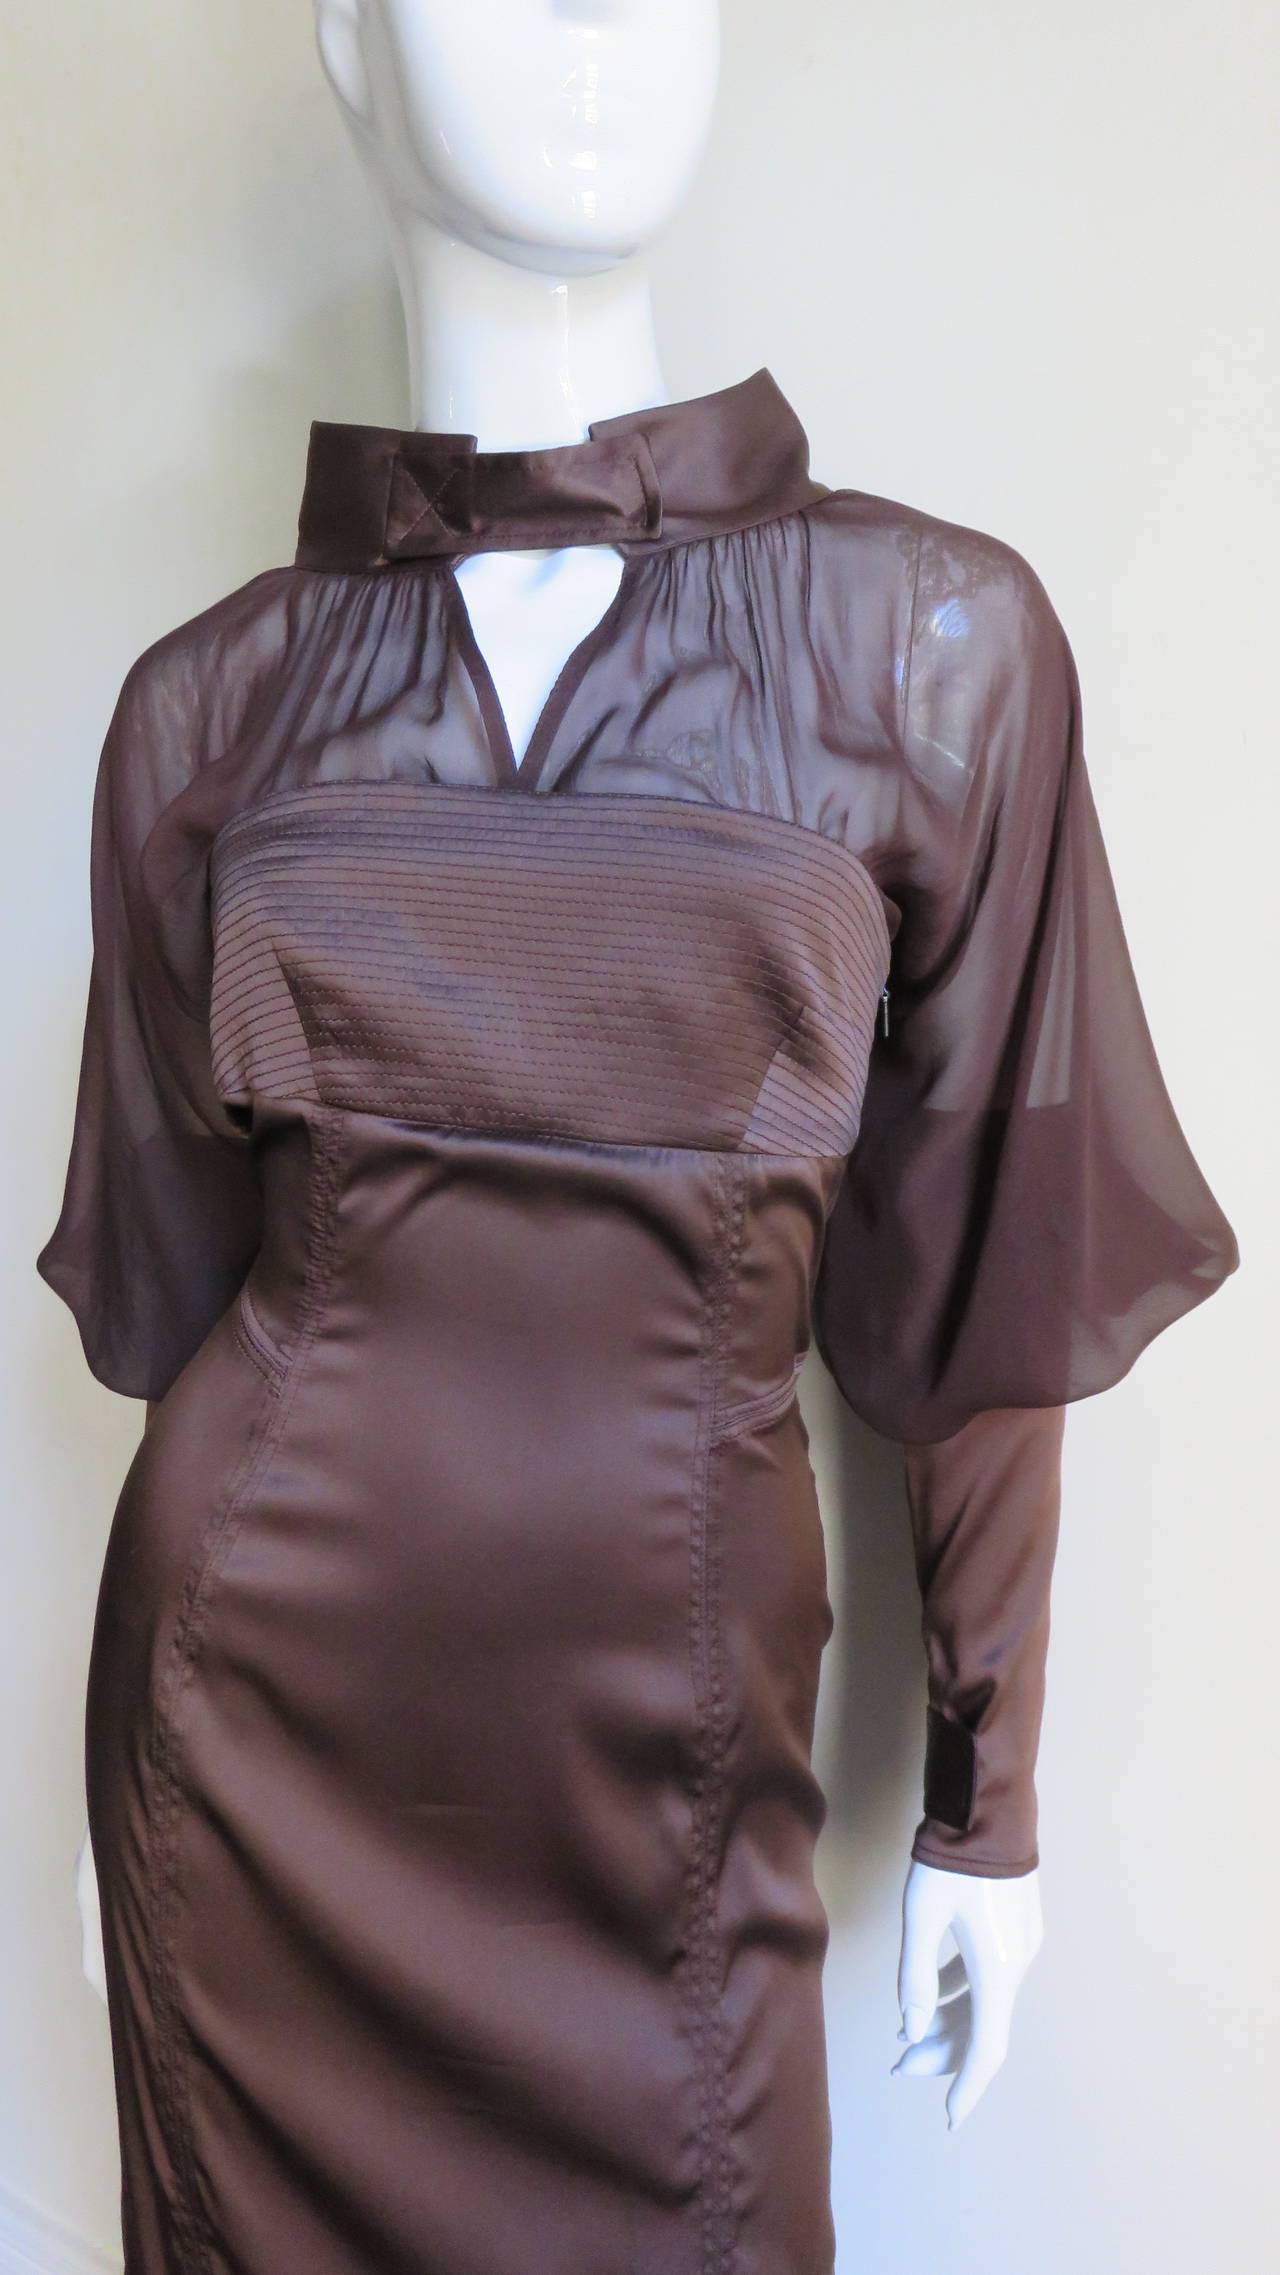 A gorgeous dress from Tom Ford for Gucci in a rich chocolate brown stretch silk.  The bodice has a top stitched strapless portion with sheer chest and upper back including a stand up collar in the dress fabric. The sheer upper dramatic leg of mutton